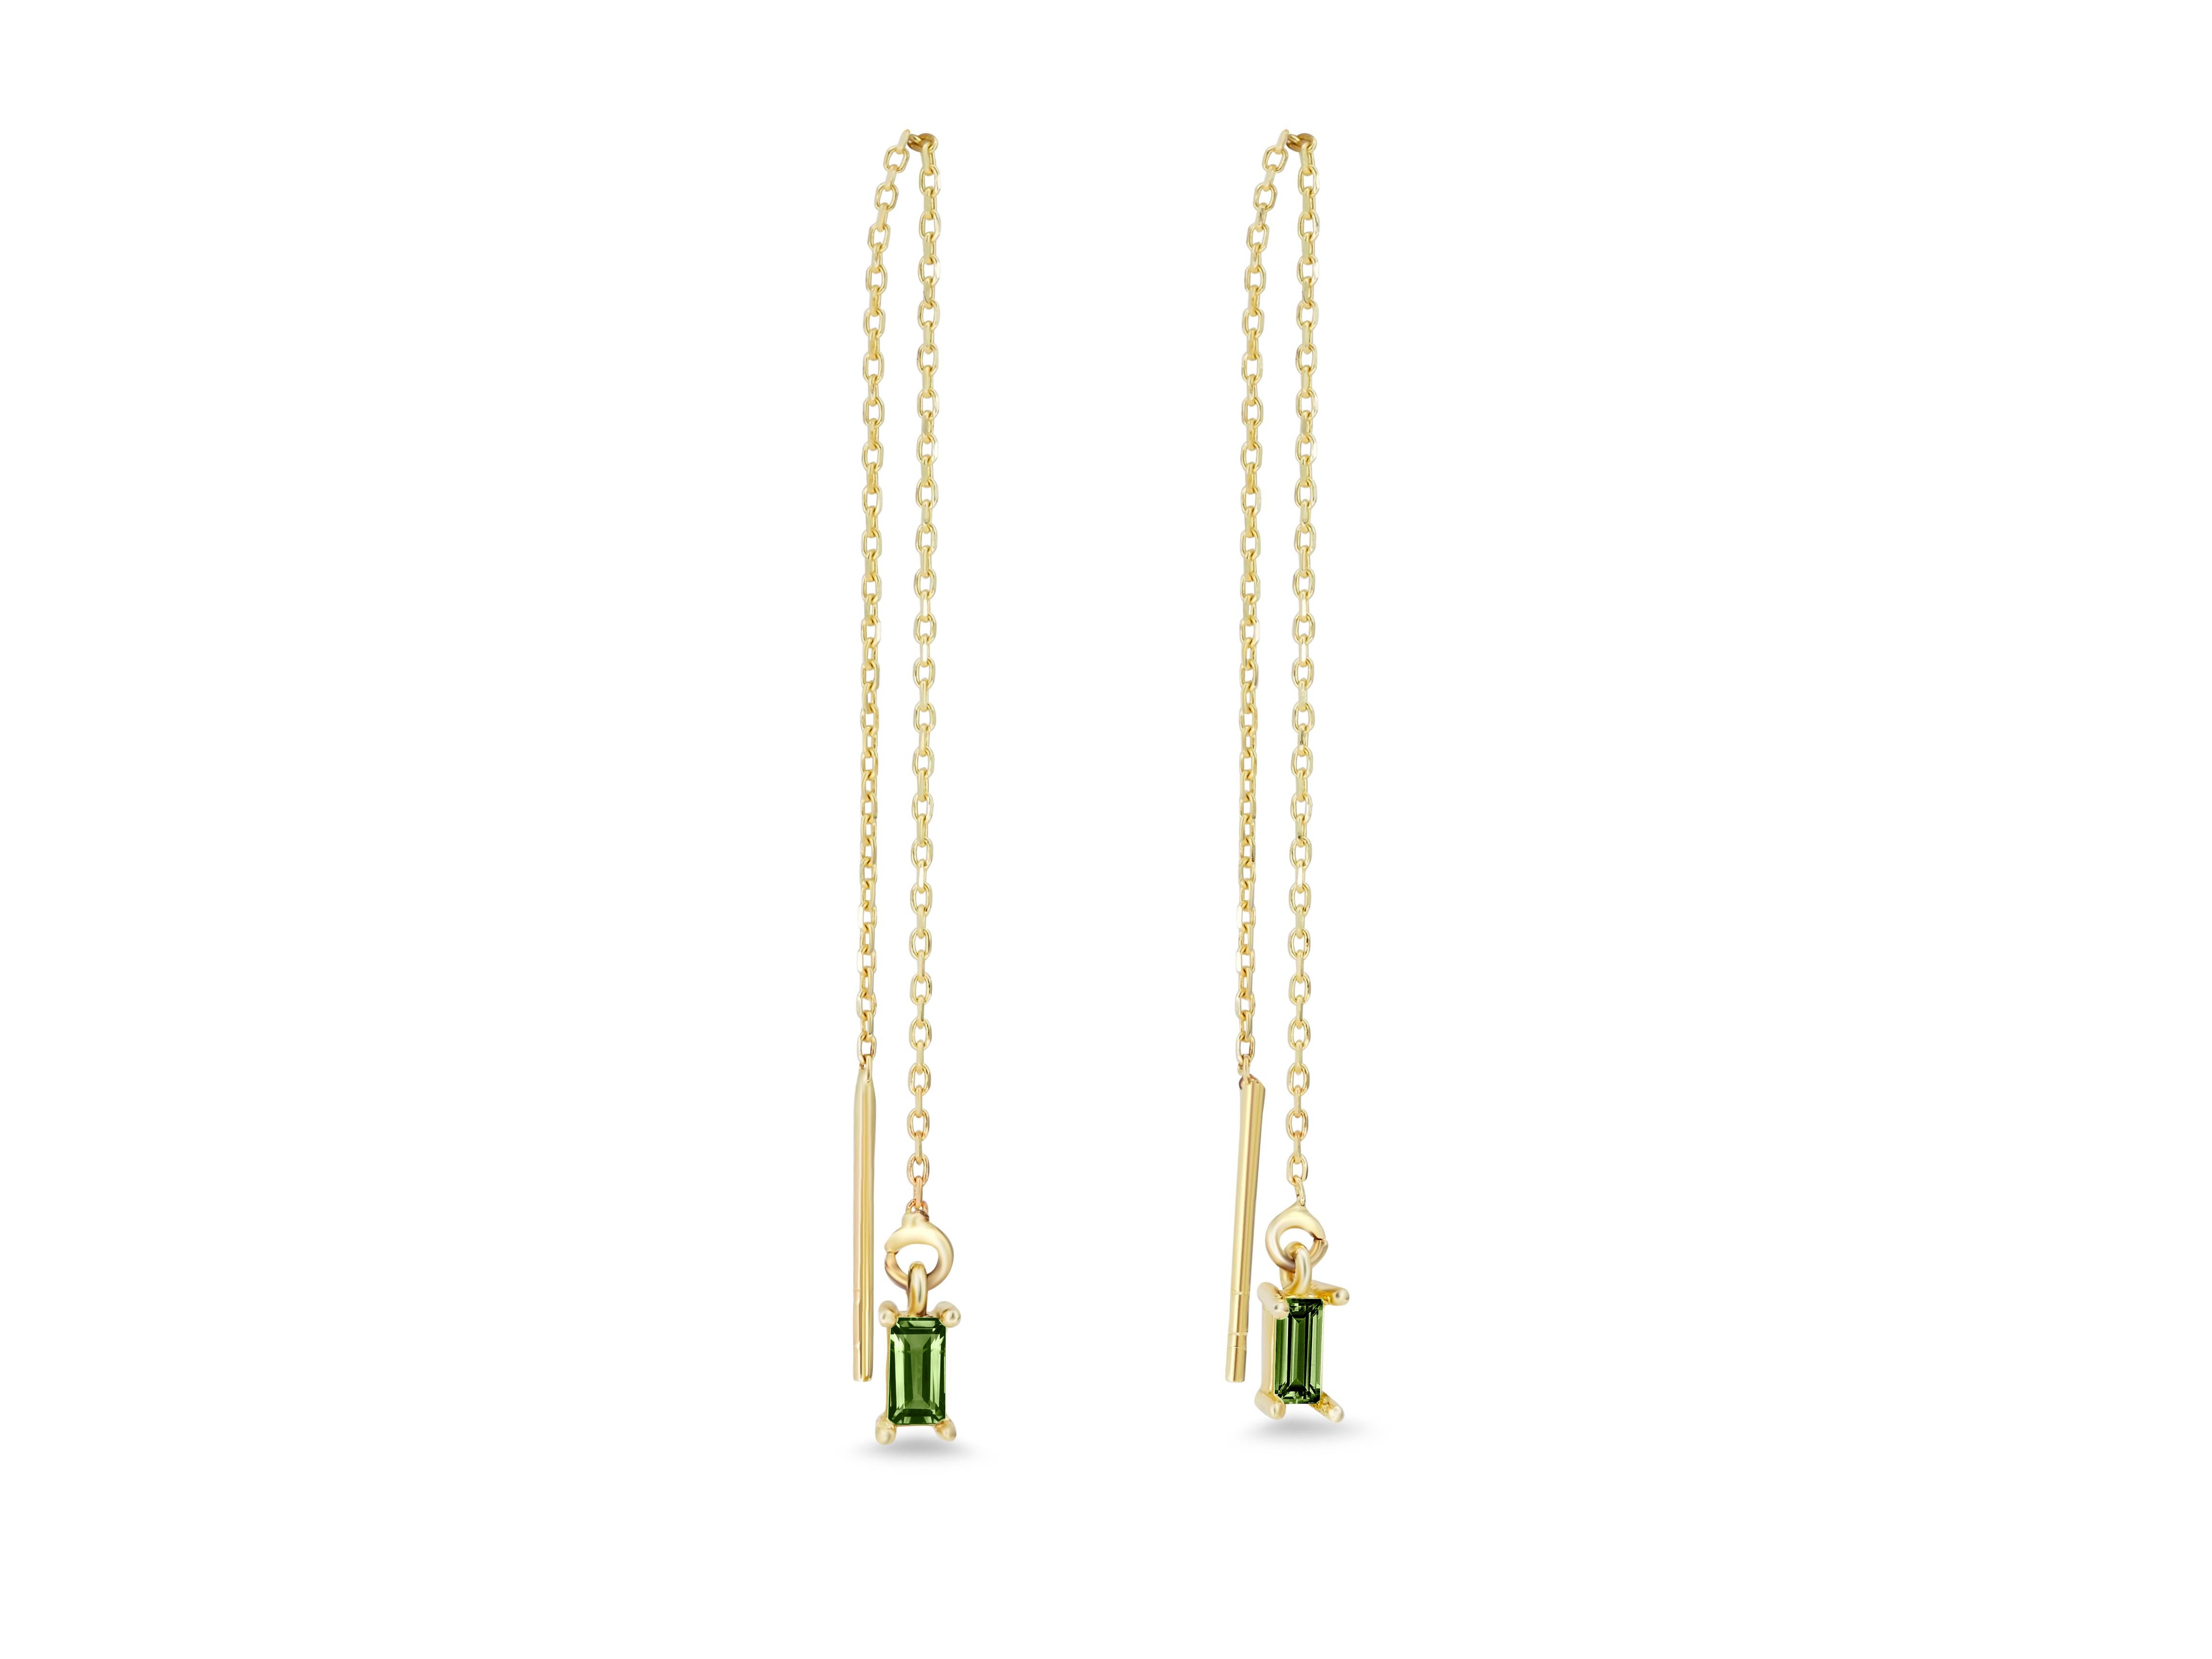 14k solid gold drop earrings with peridots. 
Natural peridot solid gold earrings. Chain earrings. Delicate Solid Gold chain Earrings.

Metal: 14k gold
Weight: 0.8-0.9 g.
Size: 6.5-6.8 sm.

Central stones: Natural peridot 2 pieces
Cut: